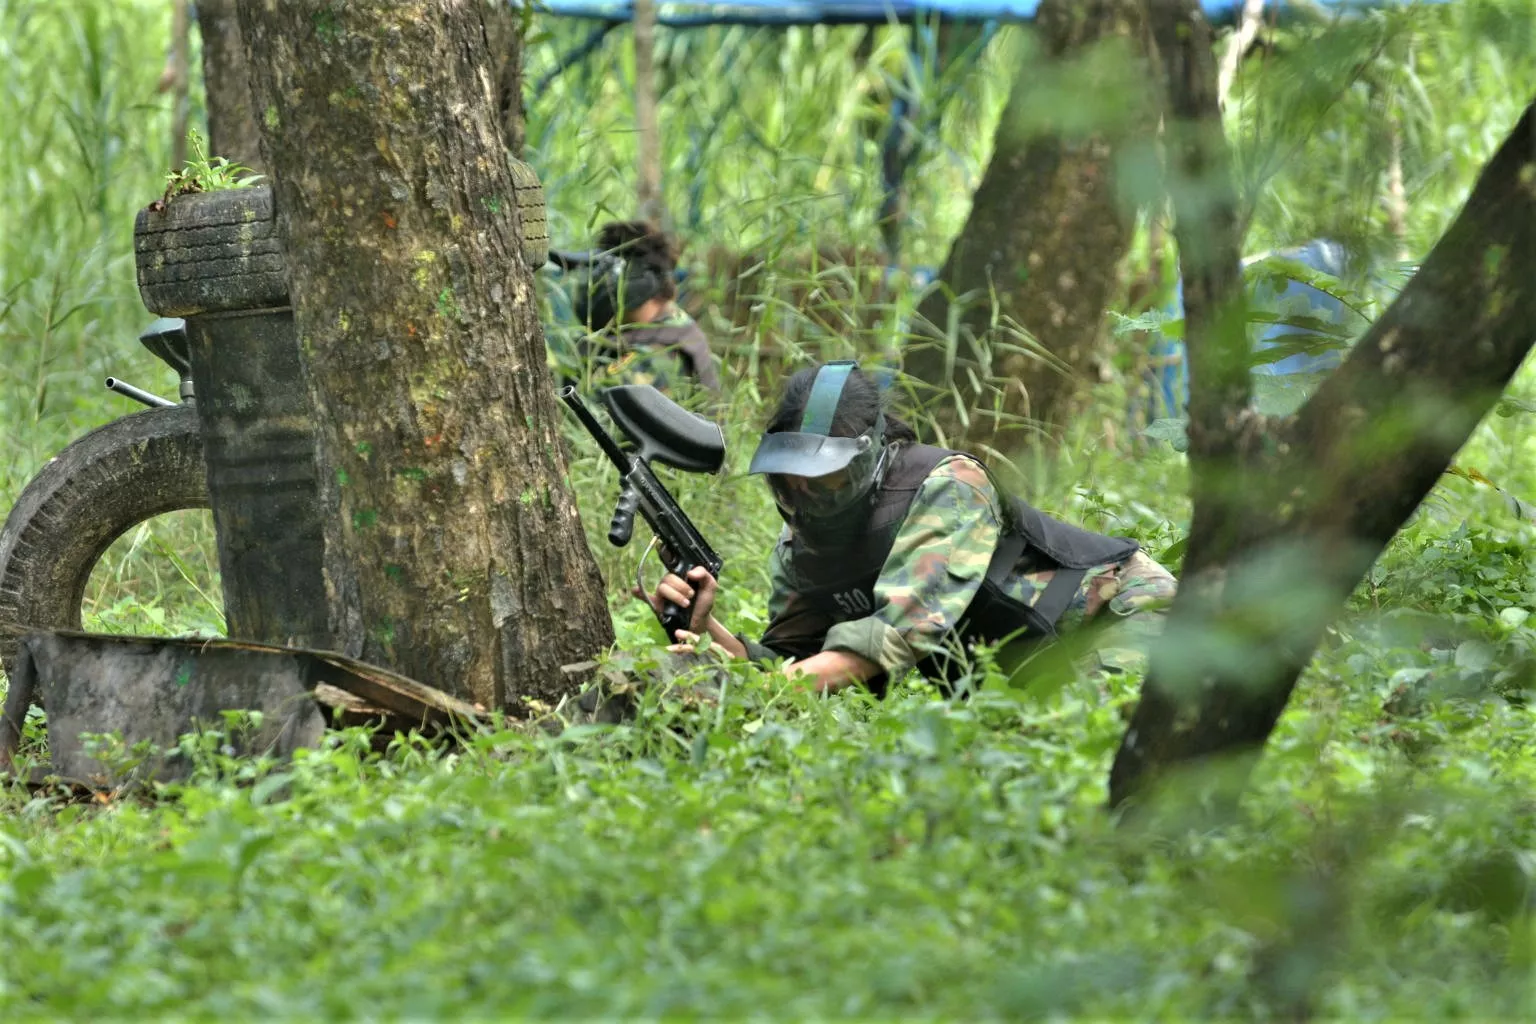 BCR Paintball Shooting Range in Vietnam, East Asia | Paintball - Rated 3.3